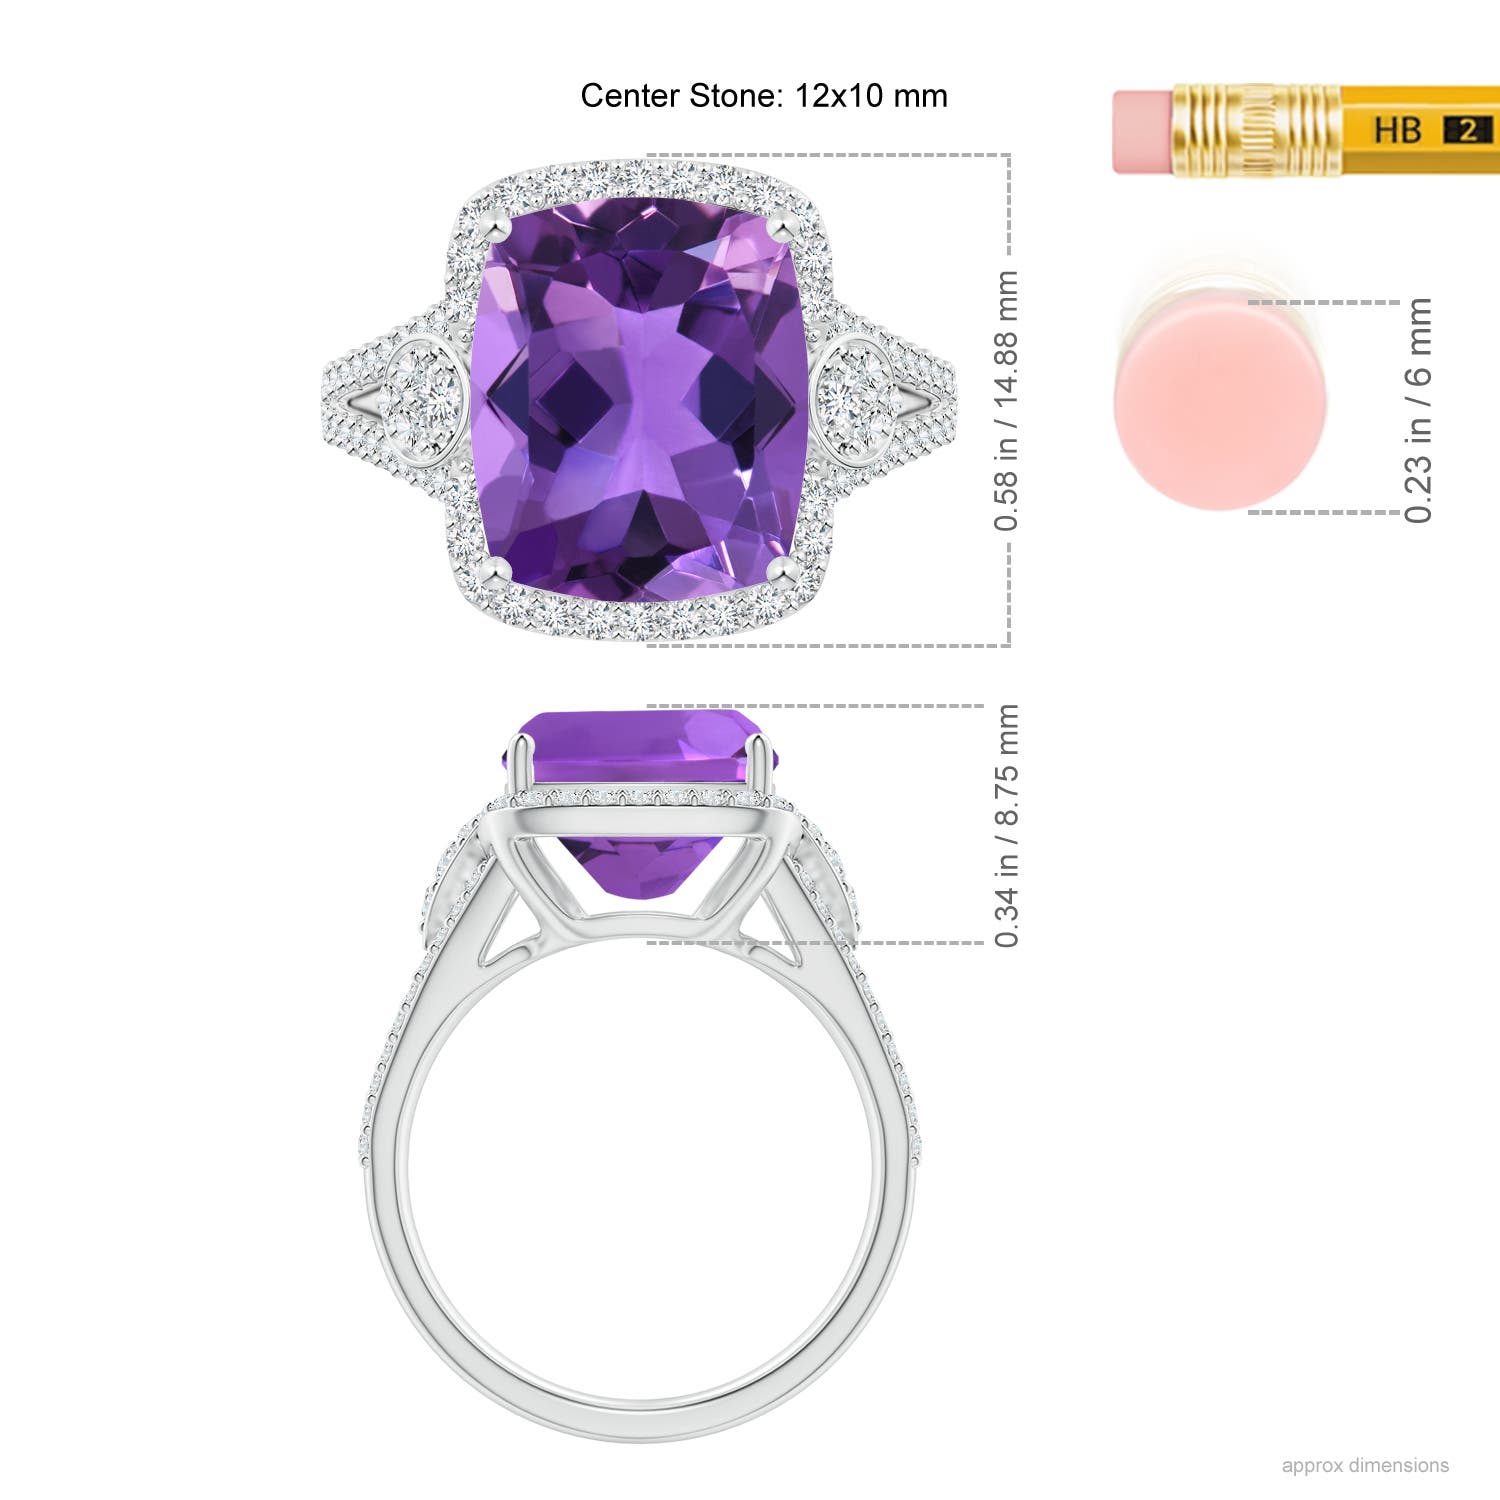 AAA - Amethyst / 5.06 CT / 14 KT White Gold